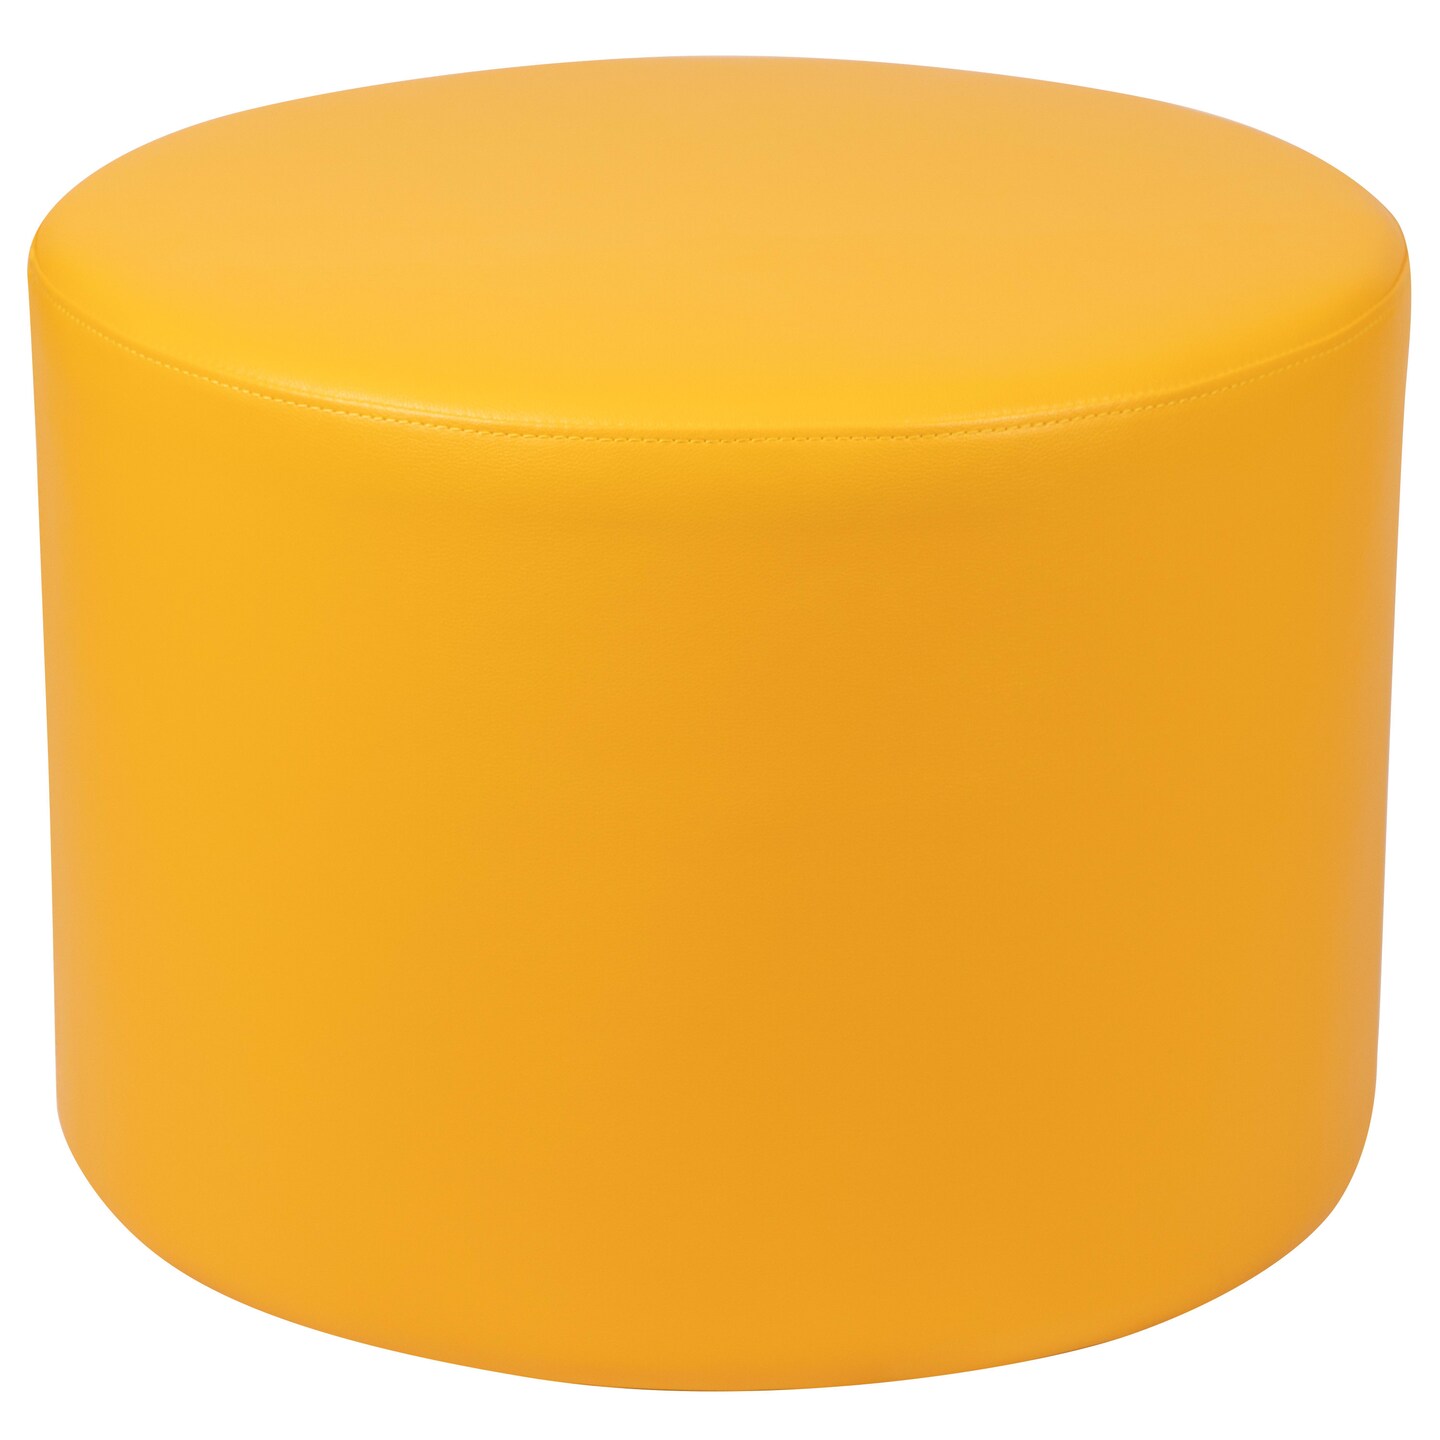 Emma and Oliver 18x24 Large Soft Seating Flexible Circle Backless Chair for Classrooms/Common Area